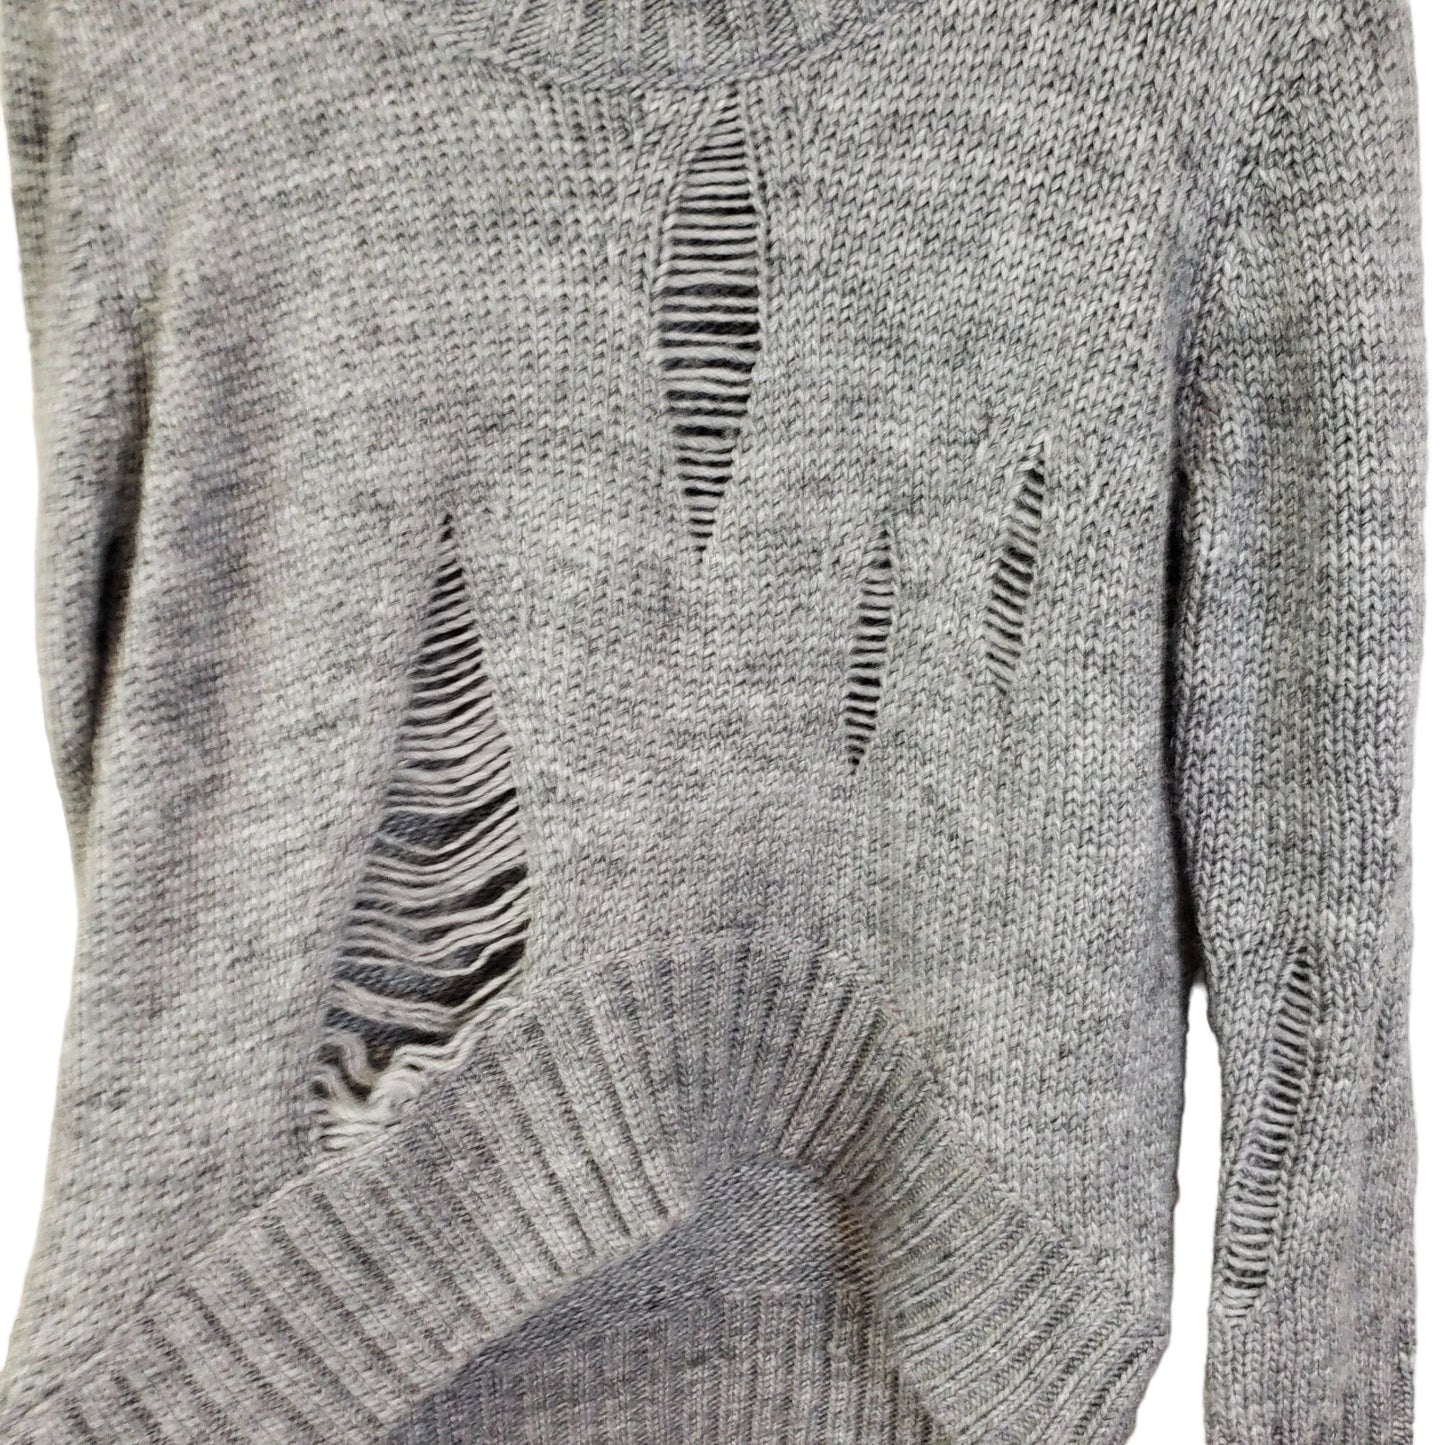 Anthropologie Katsumi Wool Blend Distressed Sweater Size Small